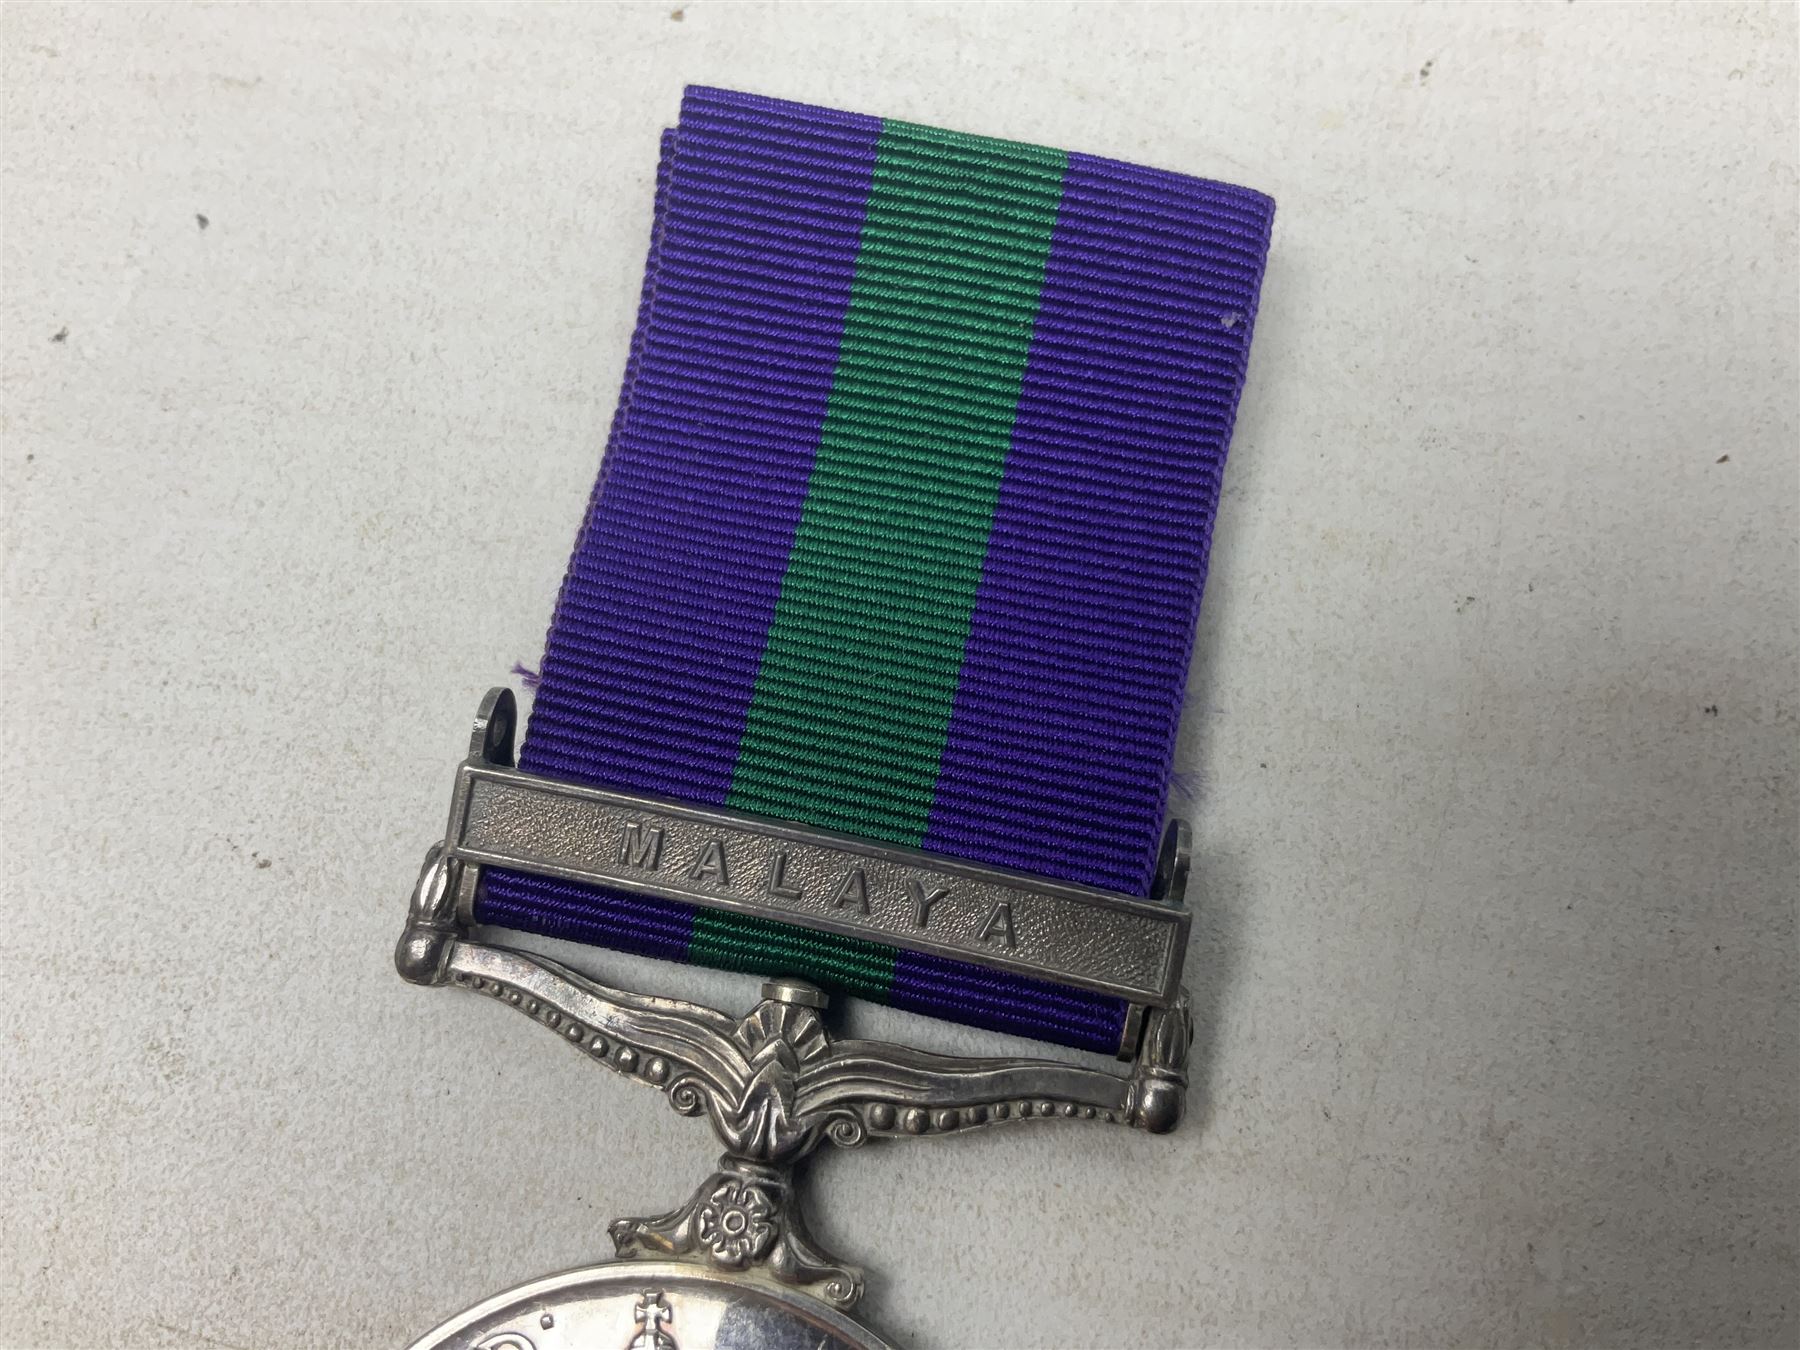 Elizabeth II General Service Medal with Malaya clasp awarded to 22682079 Pte. J. Siddall E. Yorks.; - Image 3 of 7